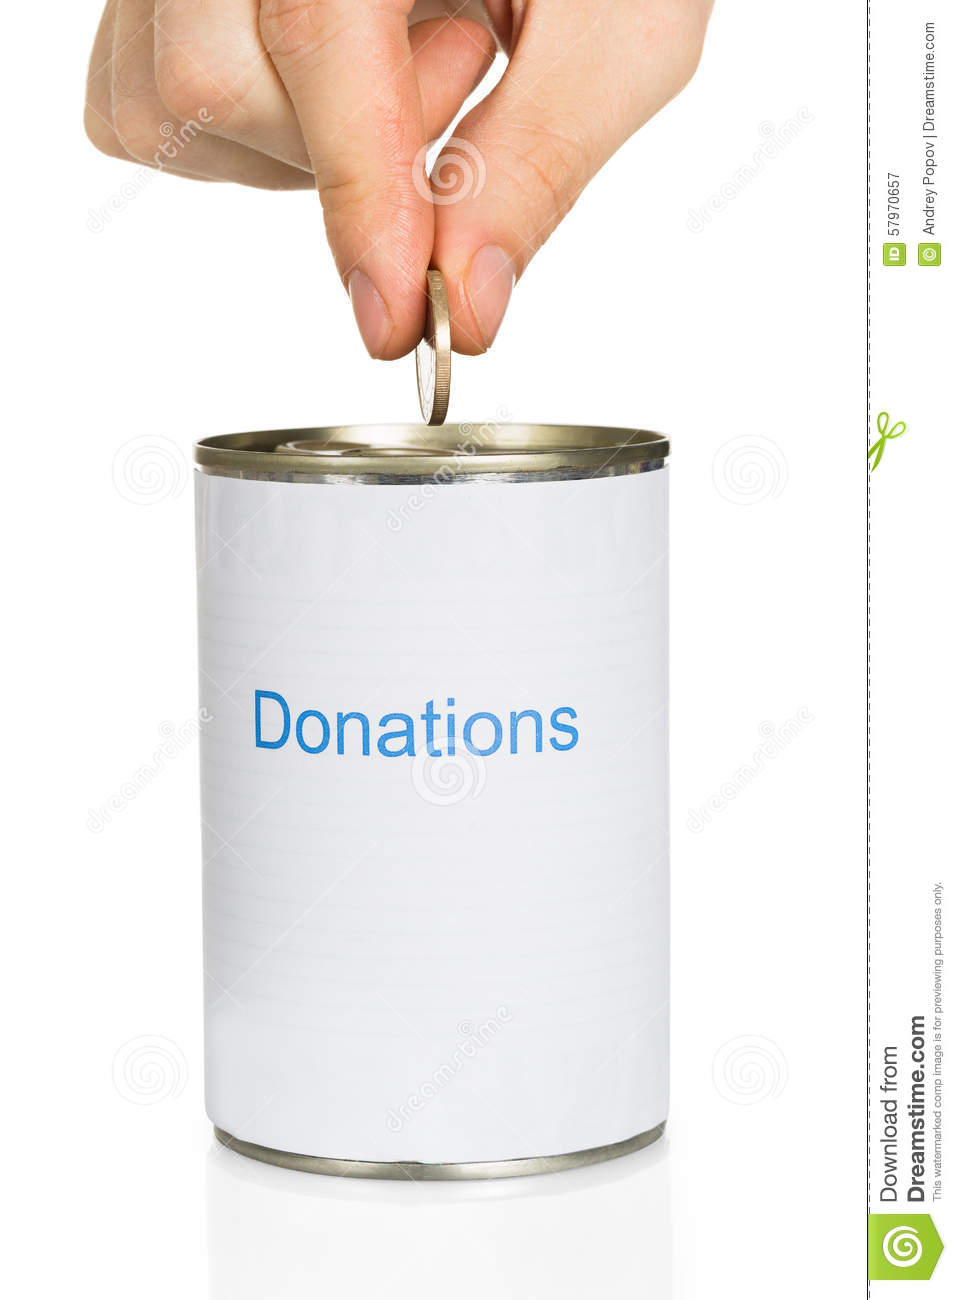 Person S Hand Putting Coin In Donation Can Over White Background